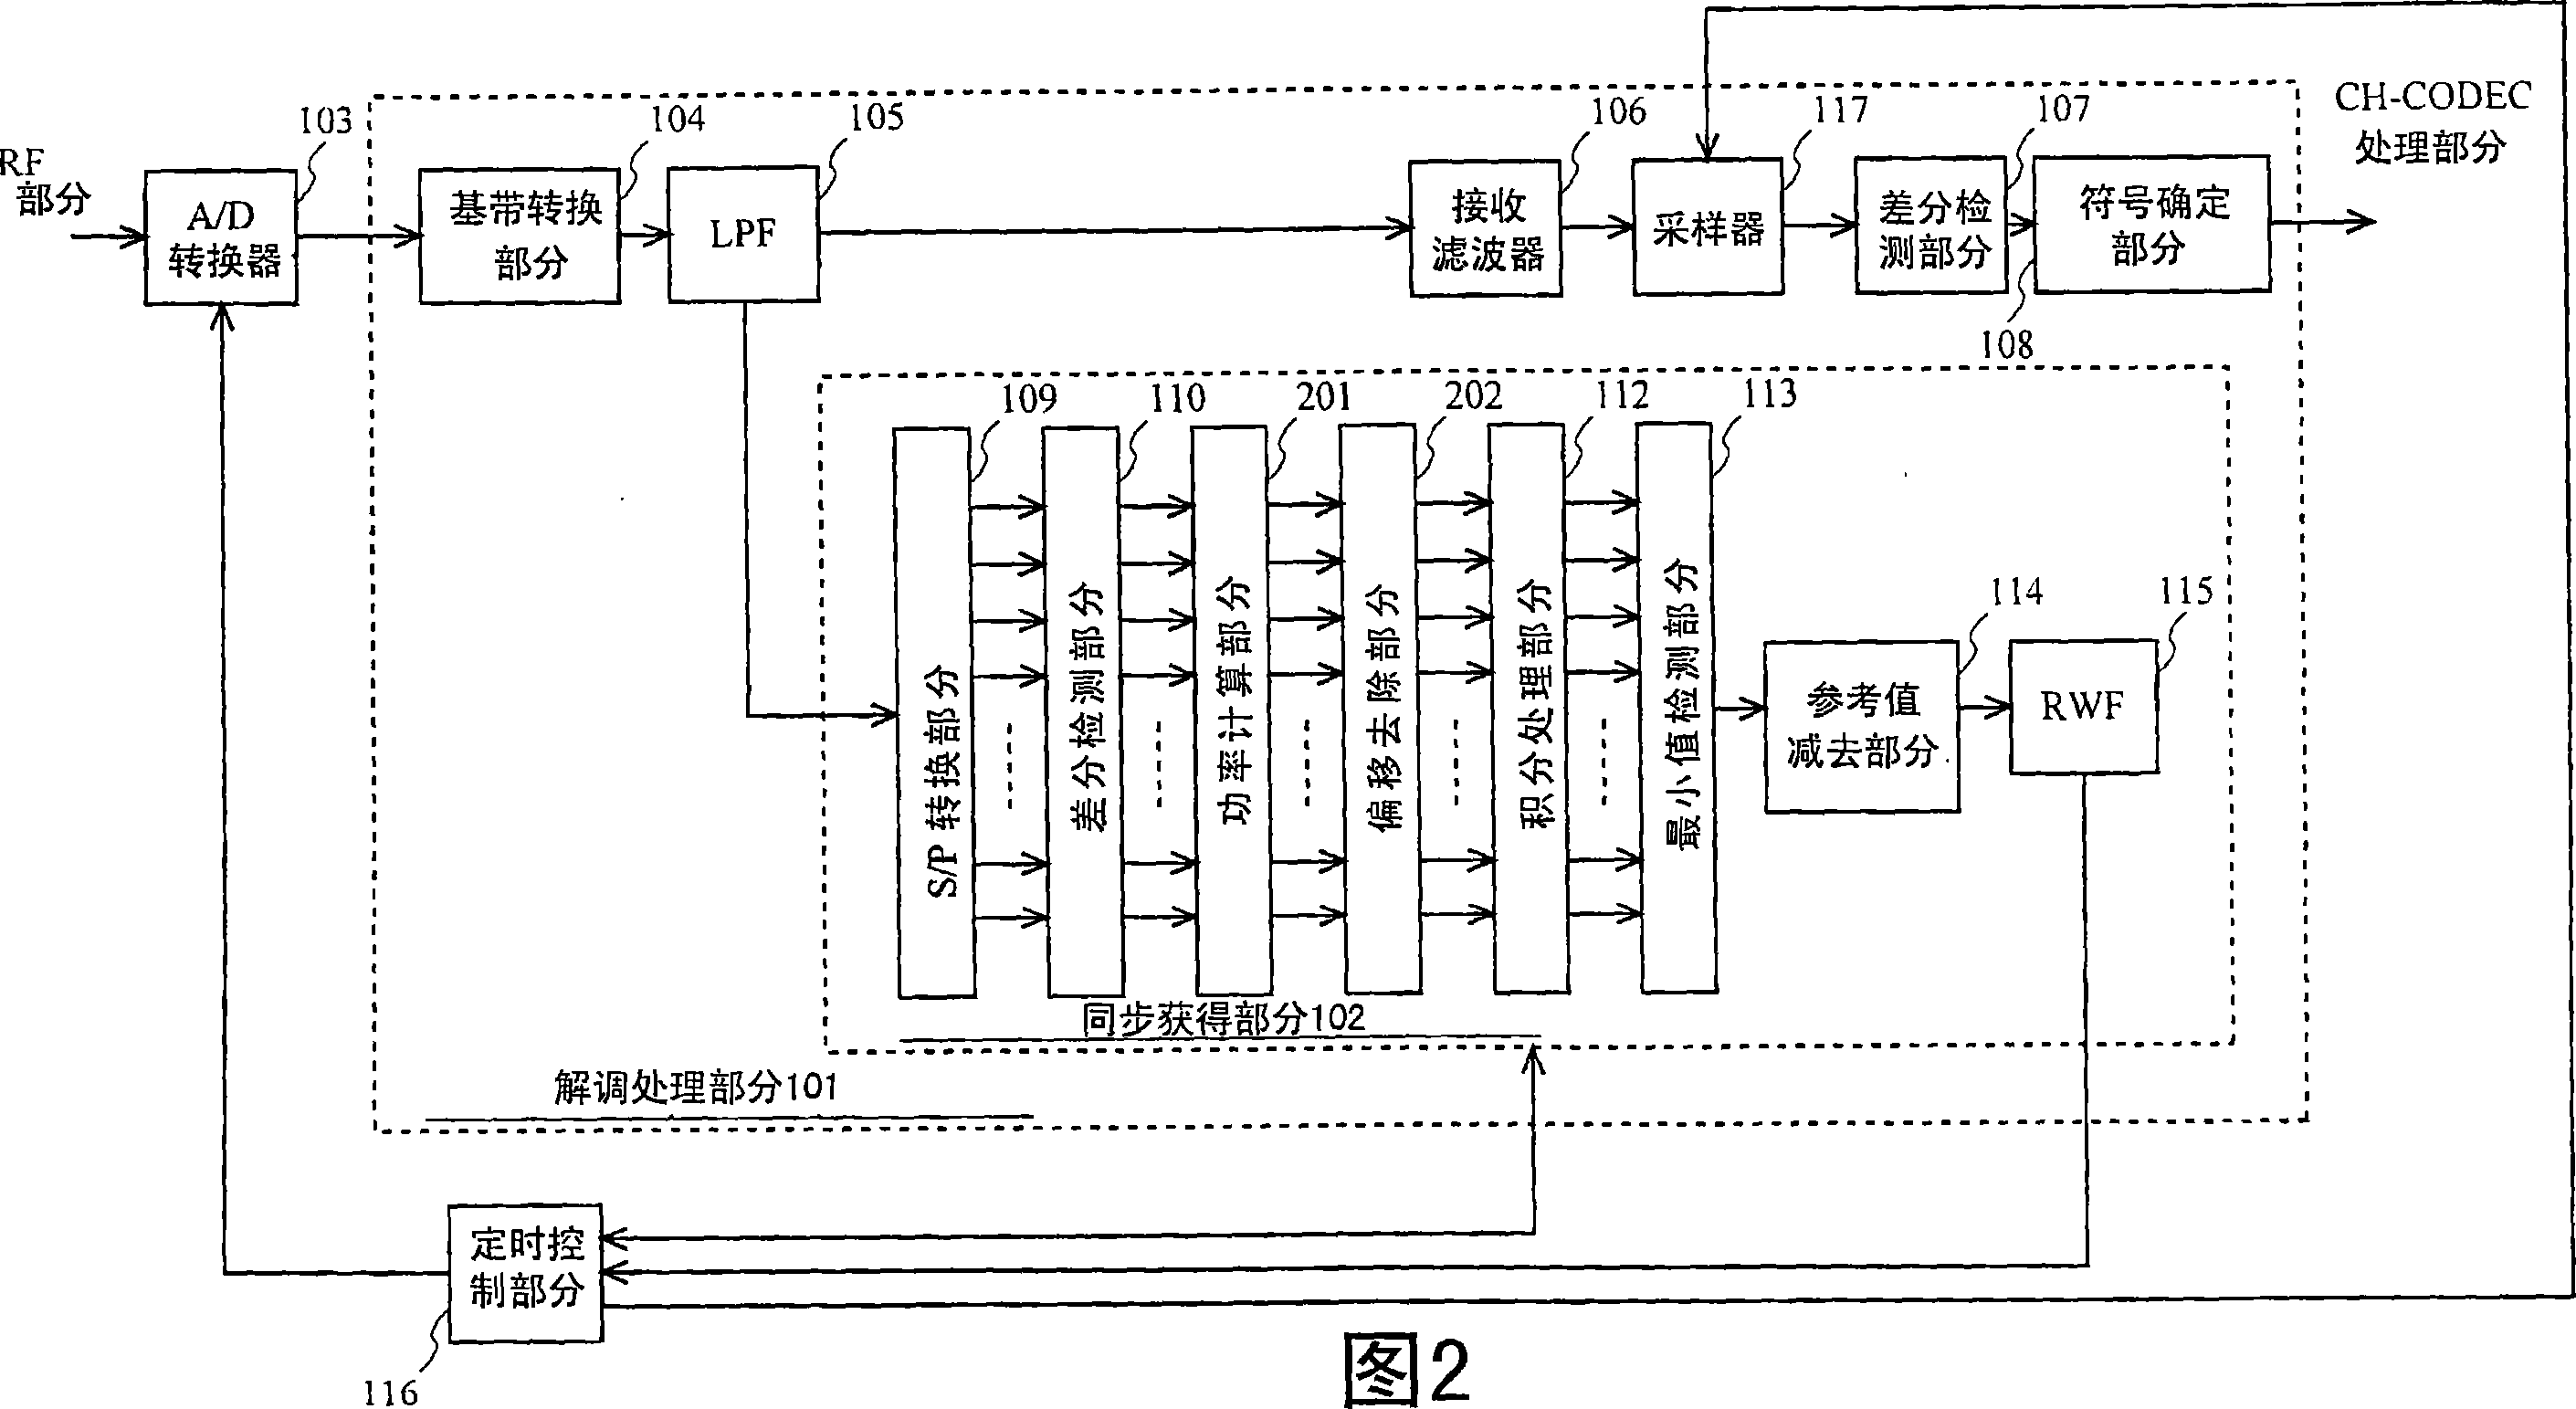 Symbol timing detector and wireless terminal